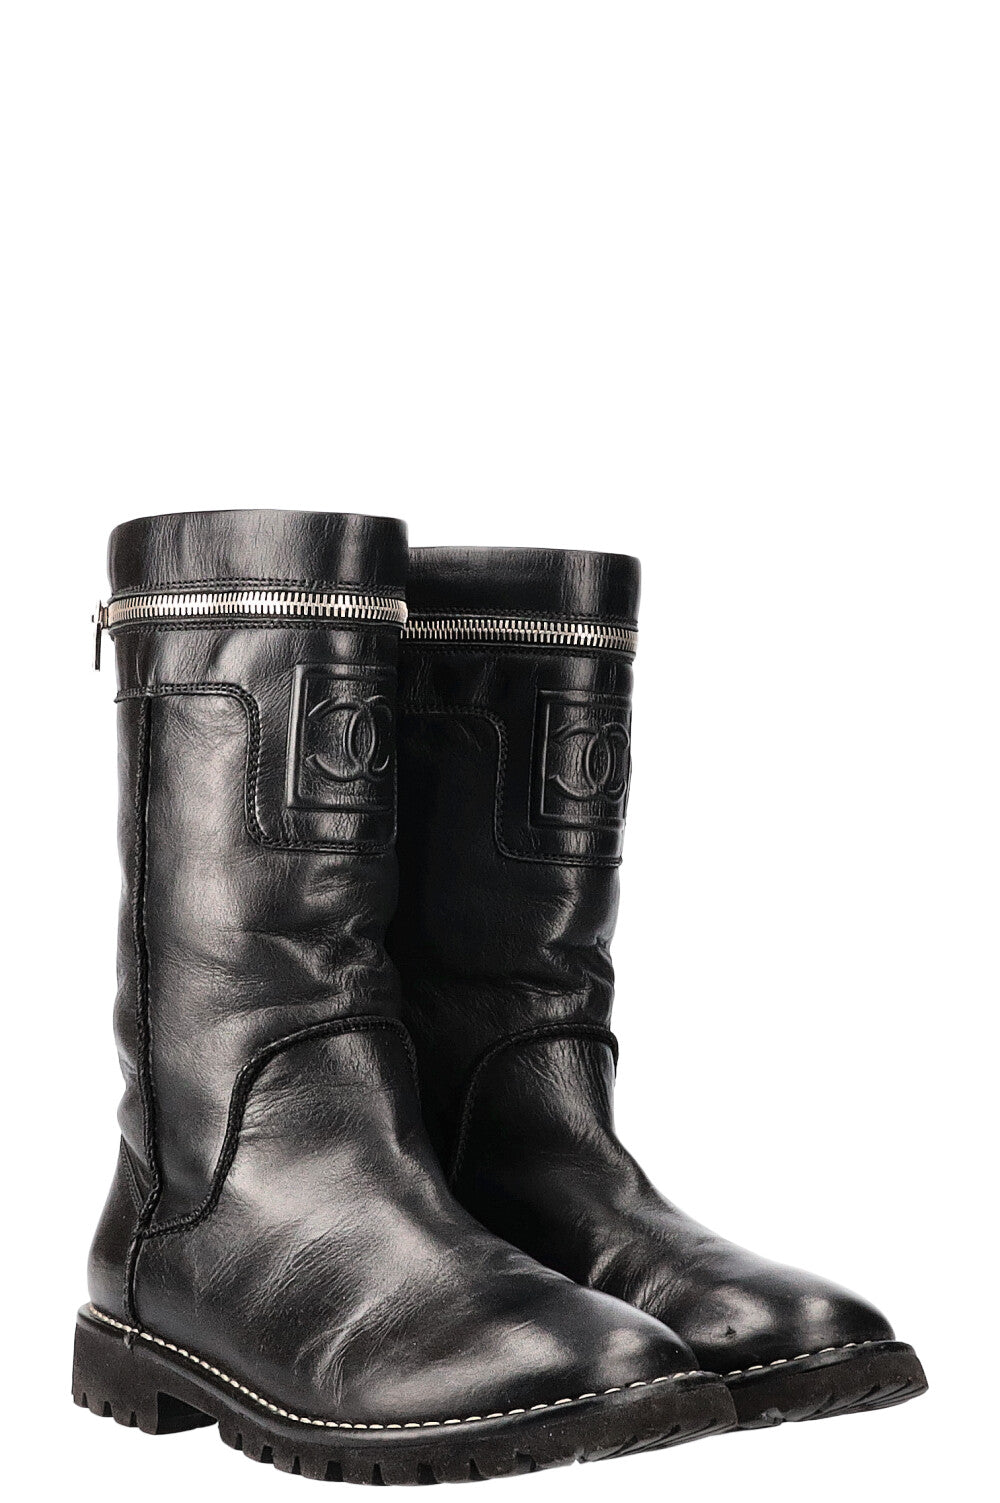 Chanel Boots Black